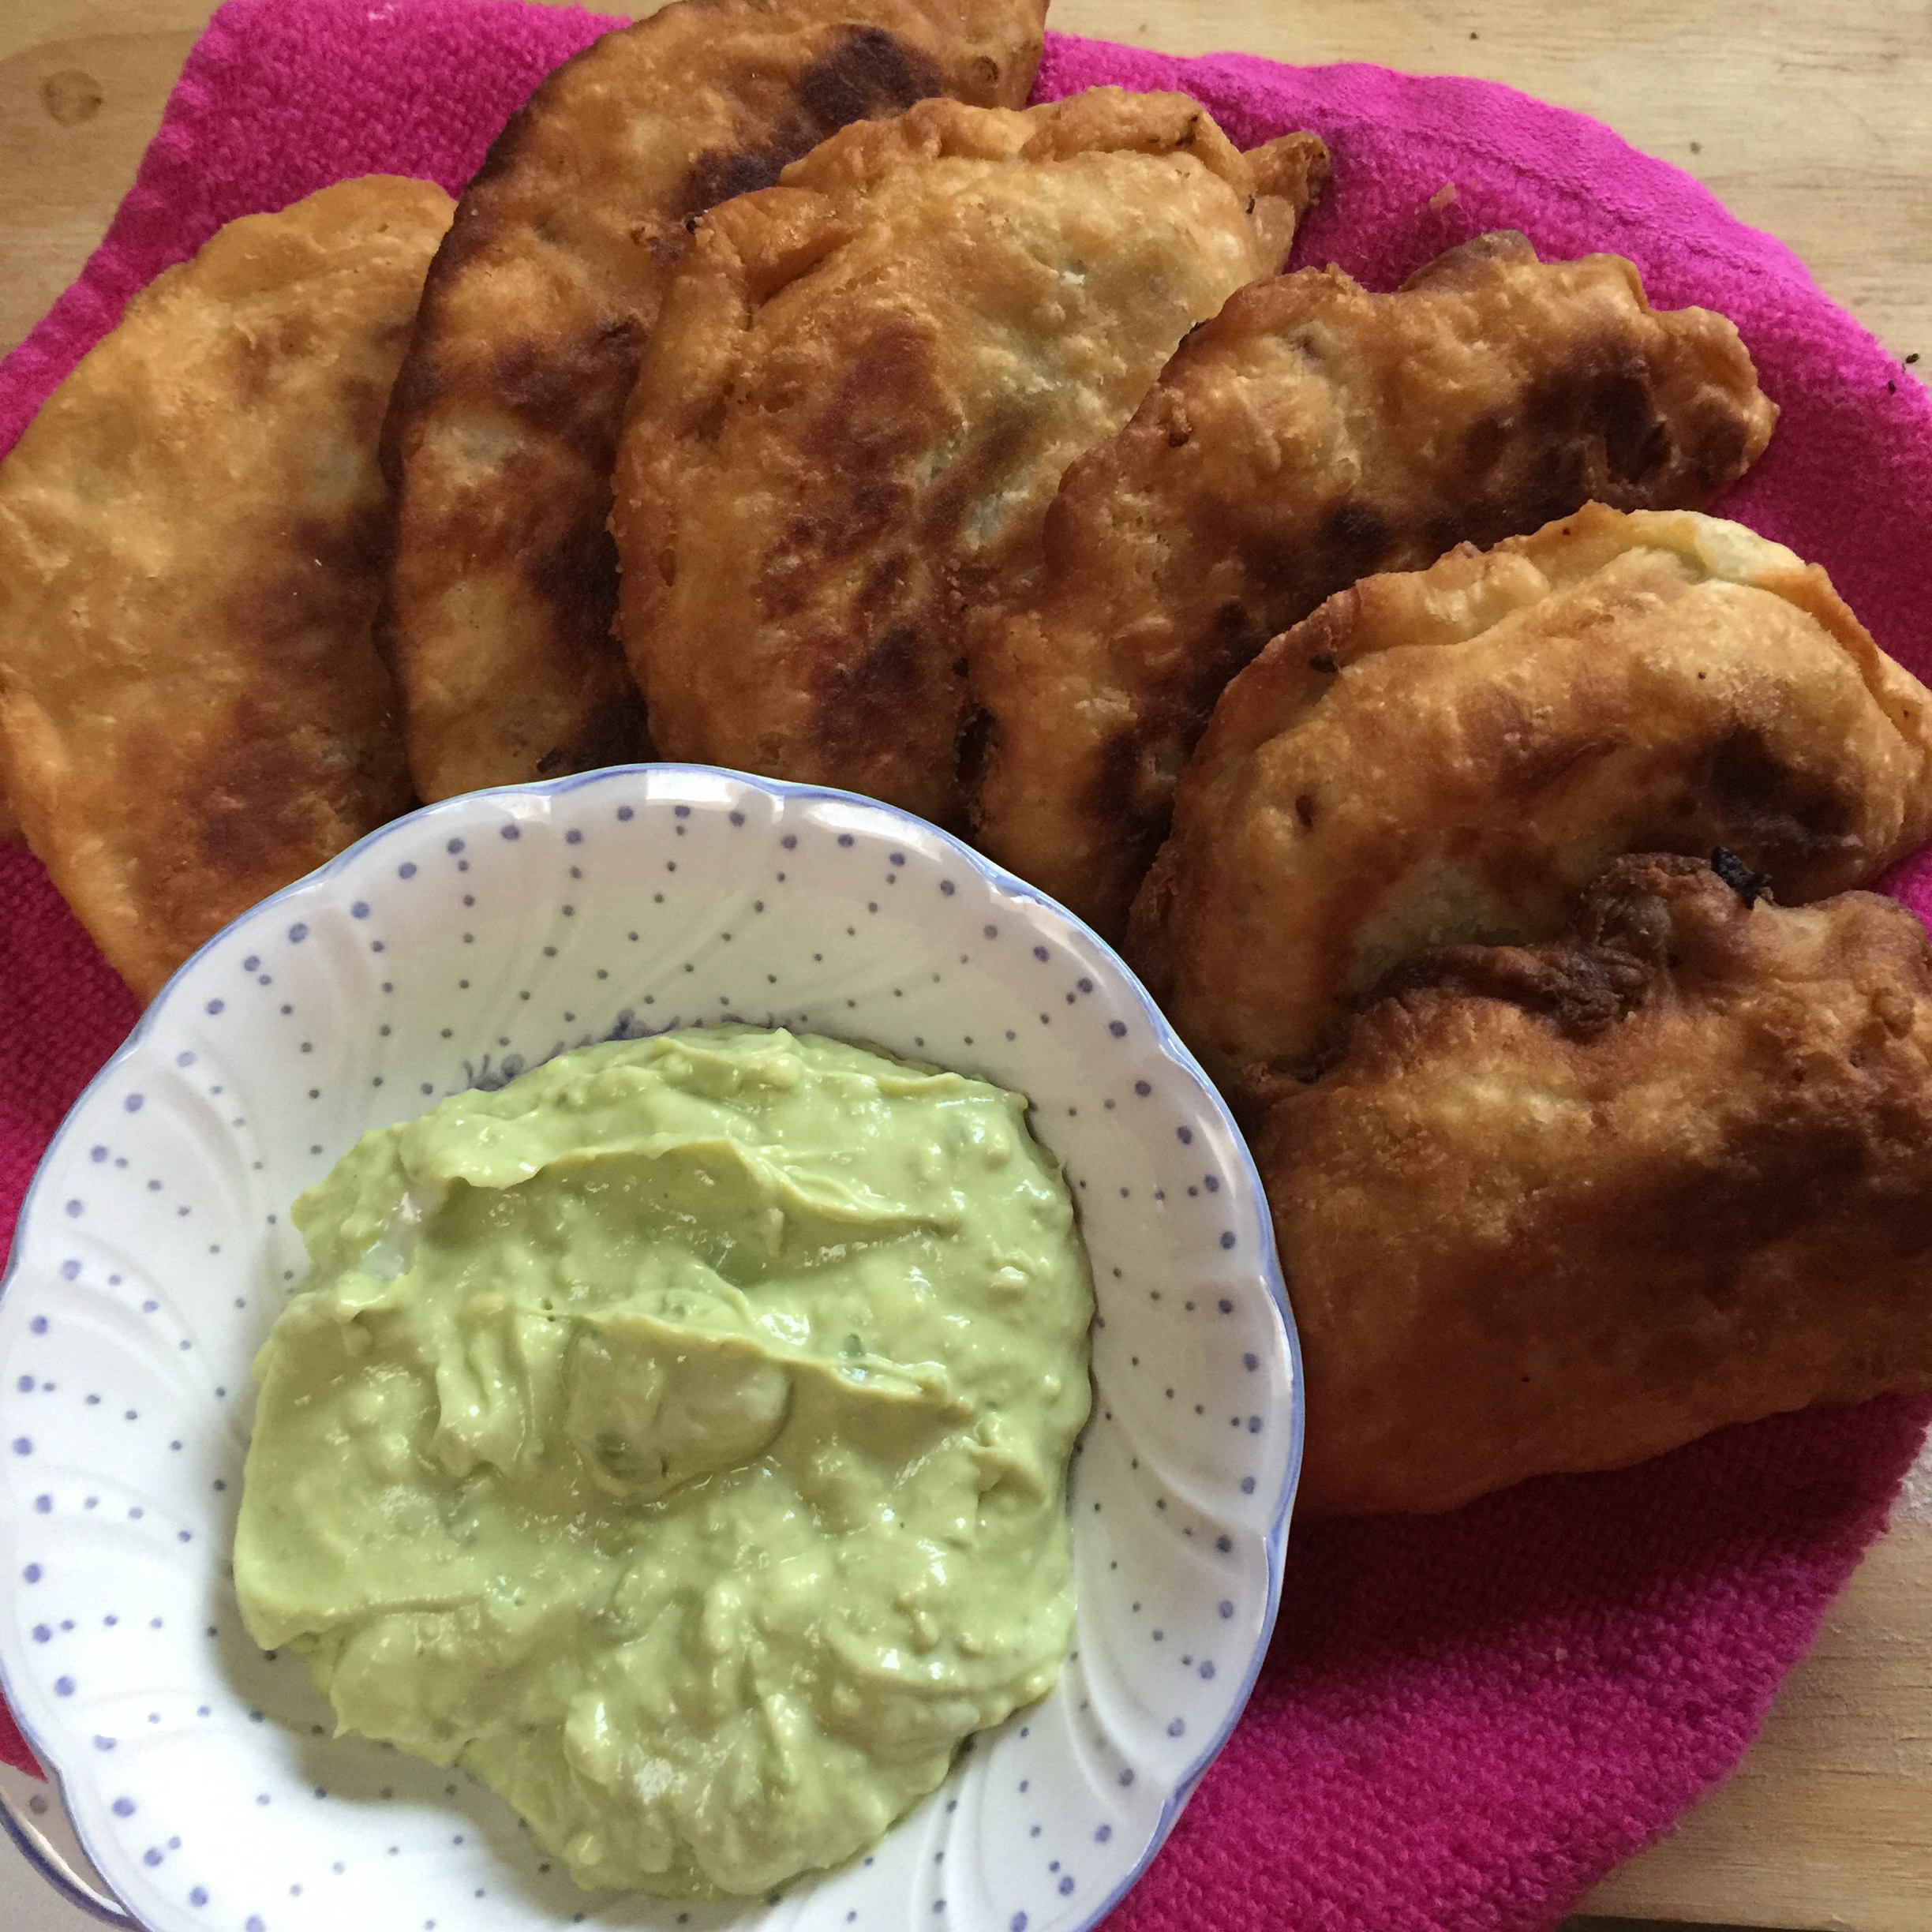 These Filipino empanadas are filled with ground pork, onions, peas, carrots, potato, and raisins. "This pork filling can be made way ahead of time to shorten the preparation time for these Filipino empanadas," says lola. "Use my recipe for empanada dough."
                          